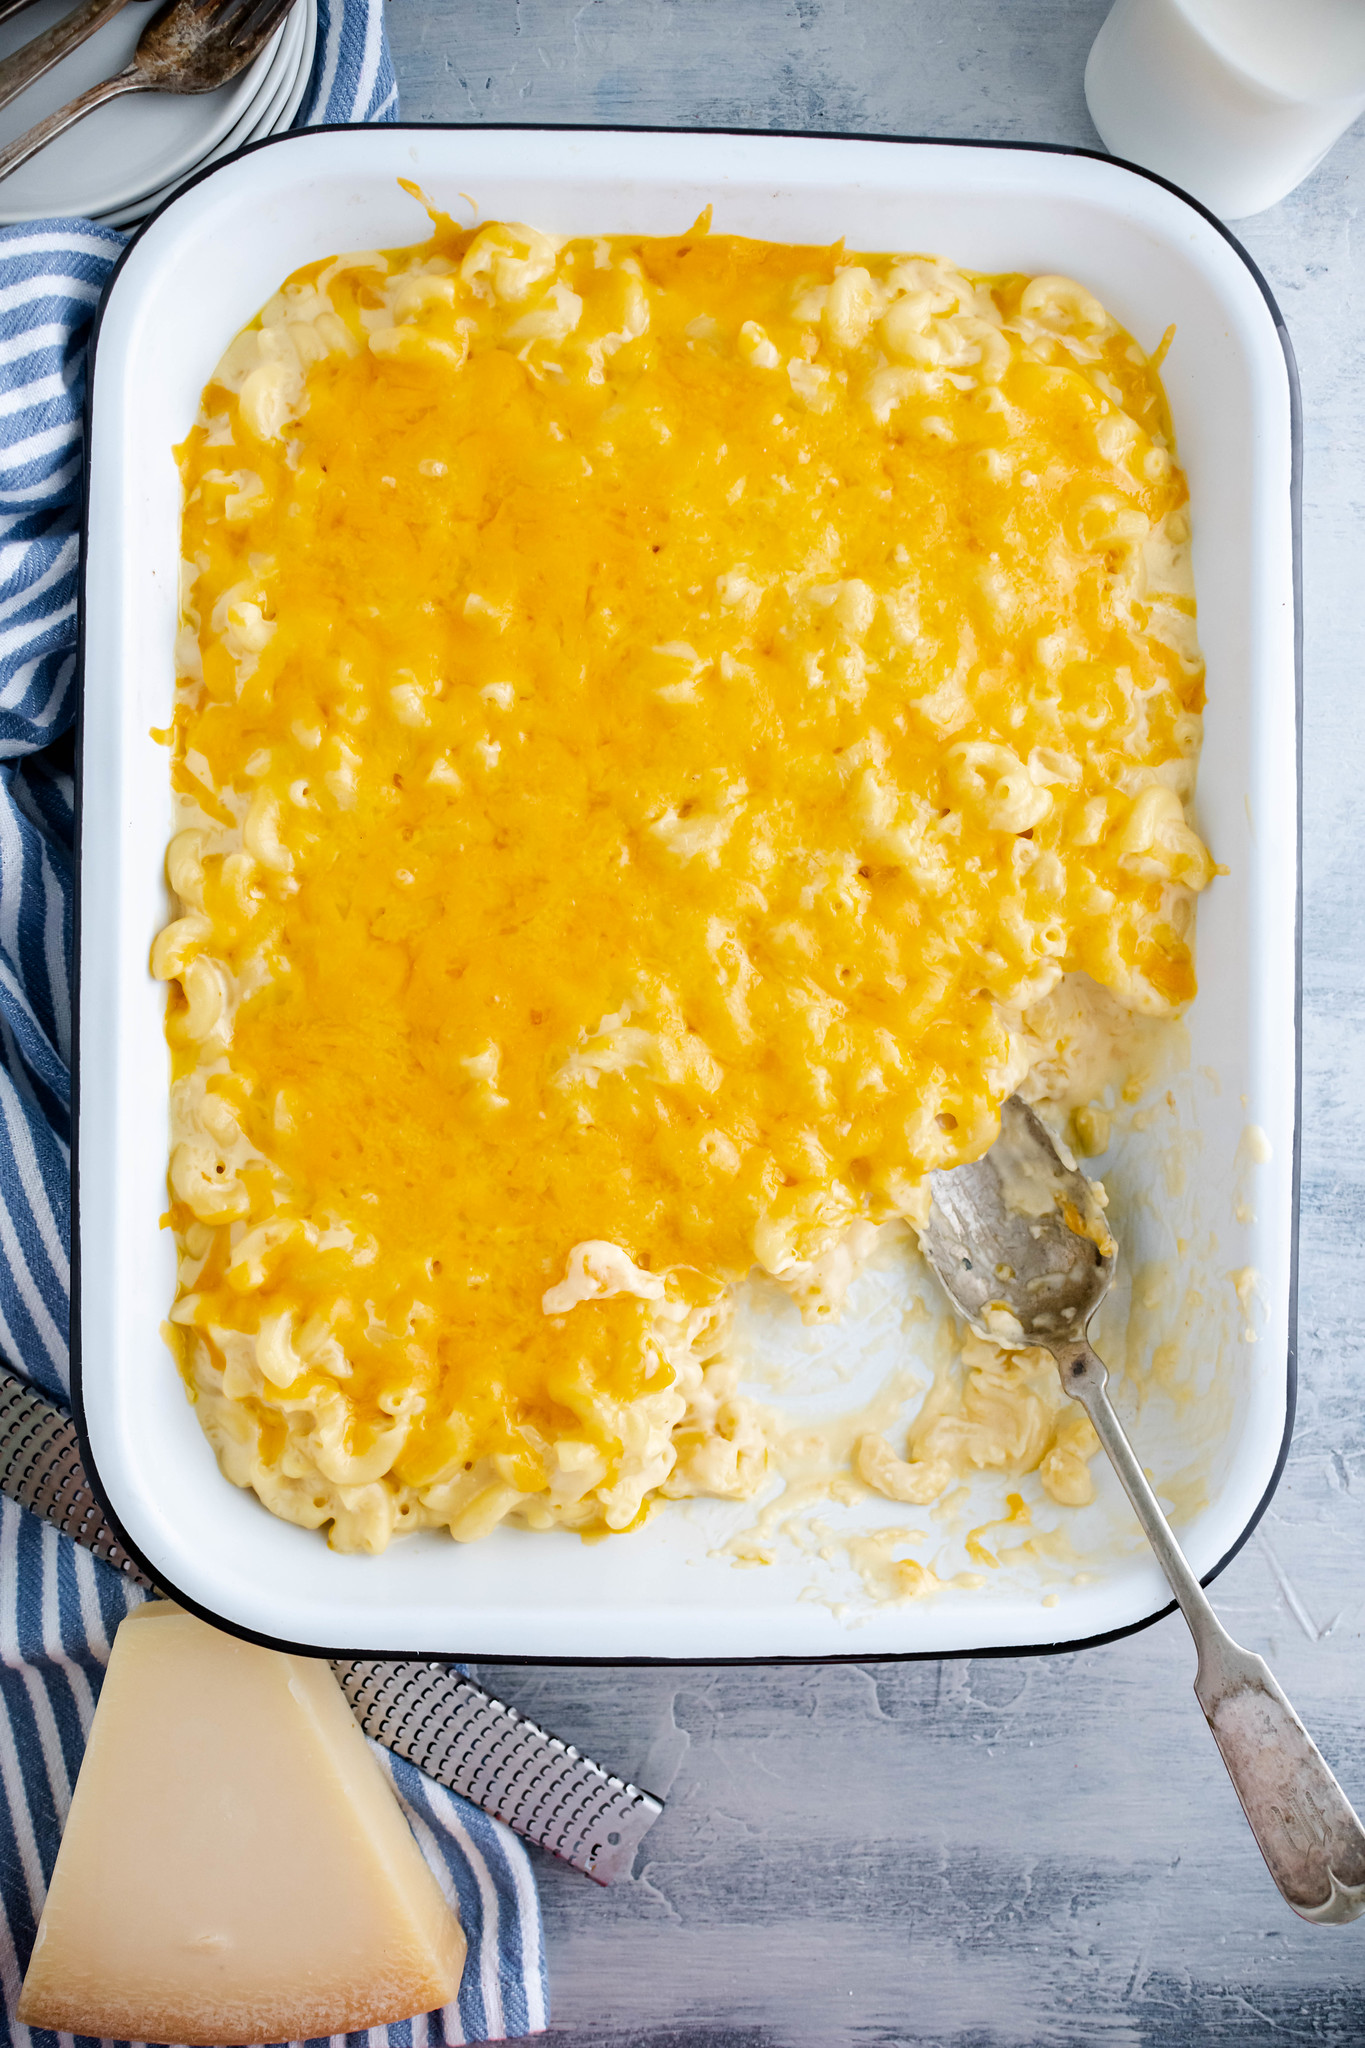 13x9 pan of macaroni and cheese with a corner of macaroni scooped out.